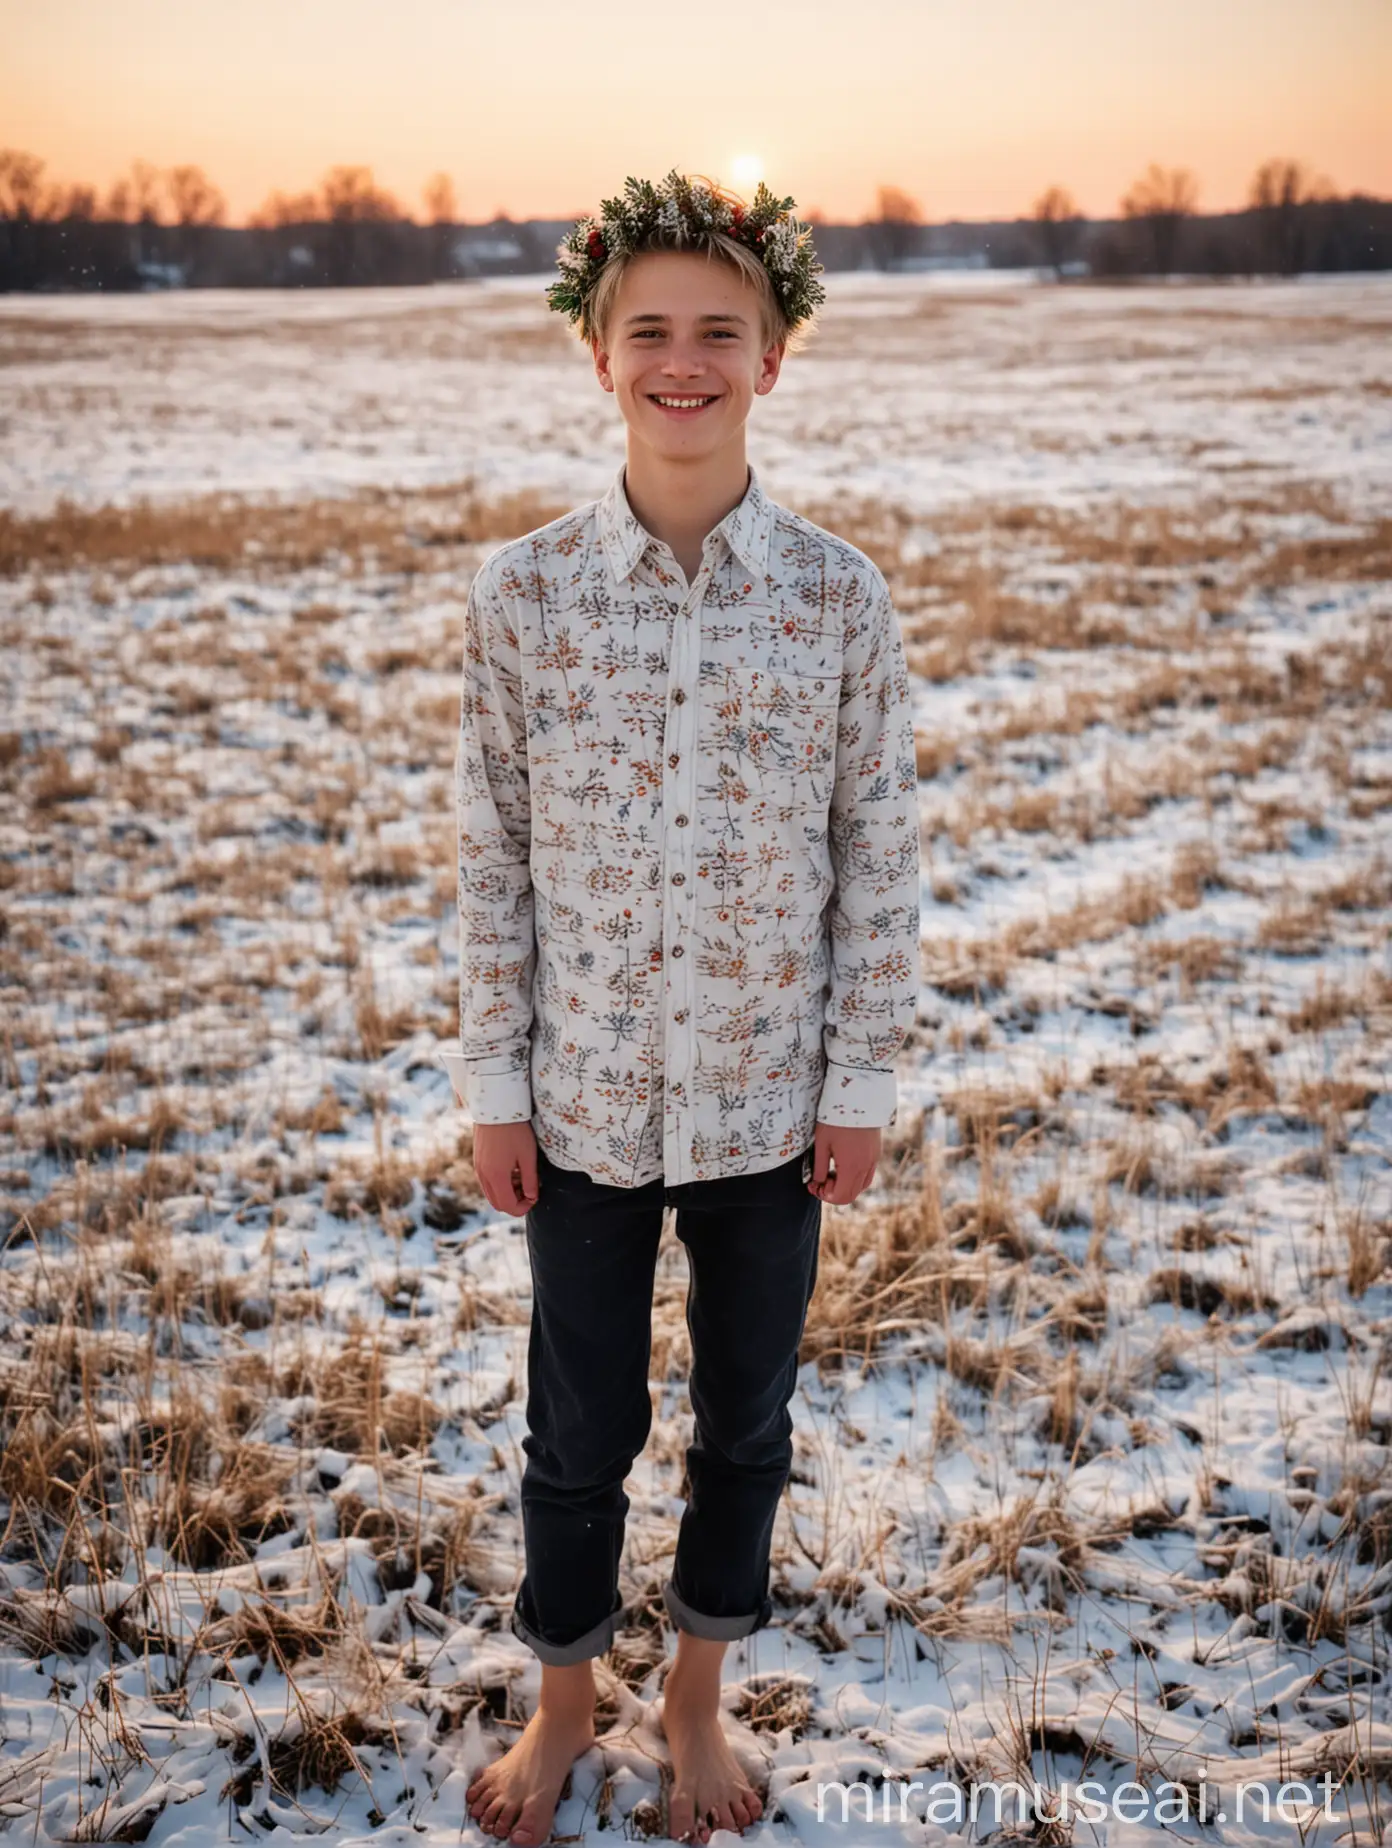 Cheerful Young Man with Wreath in Winter Field